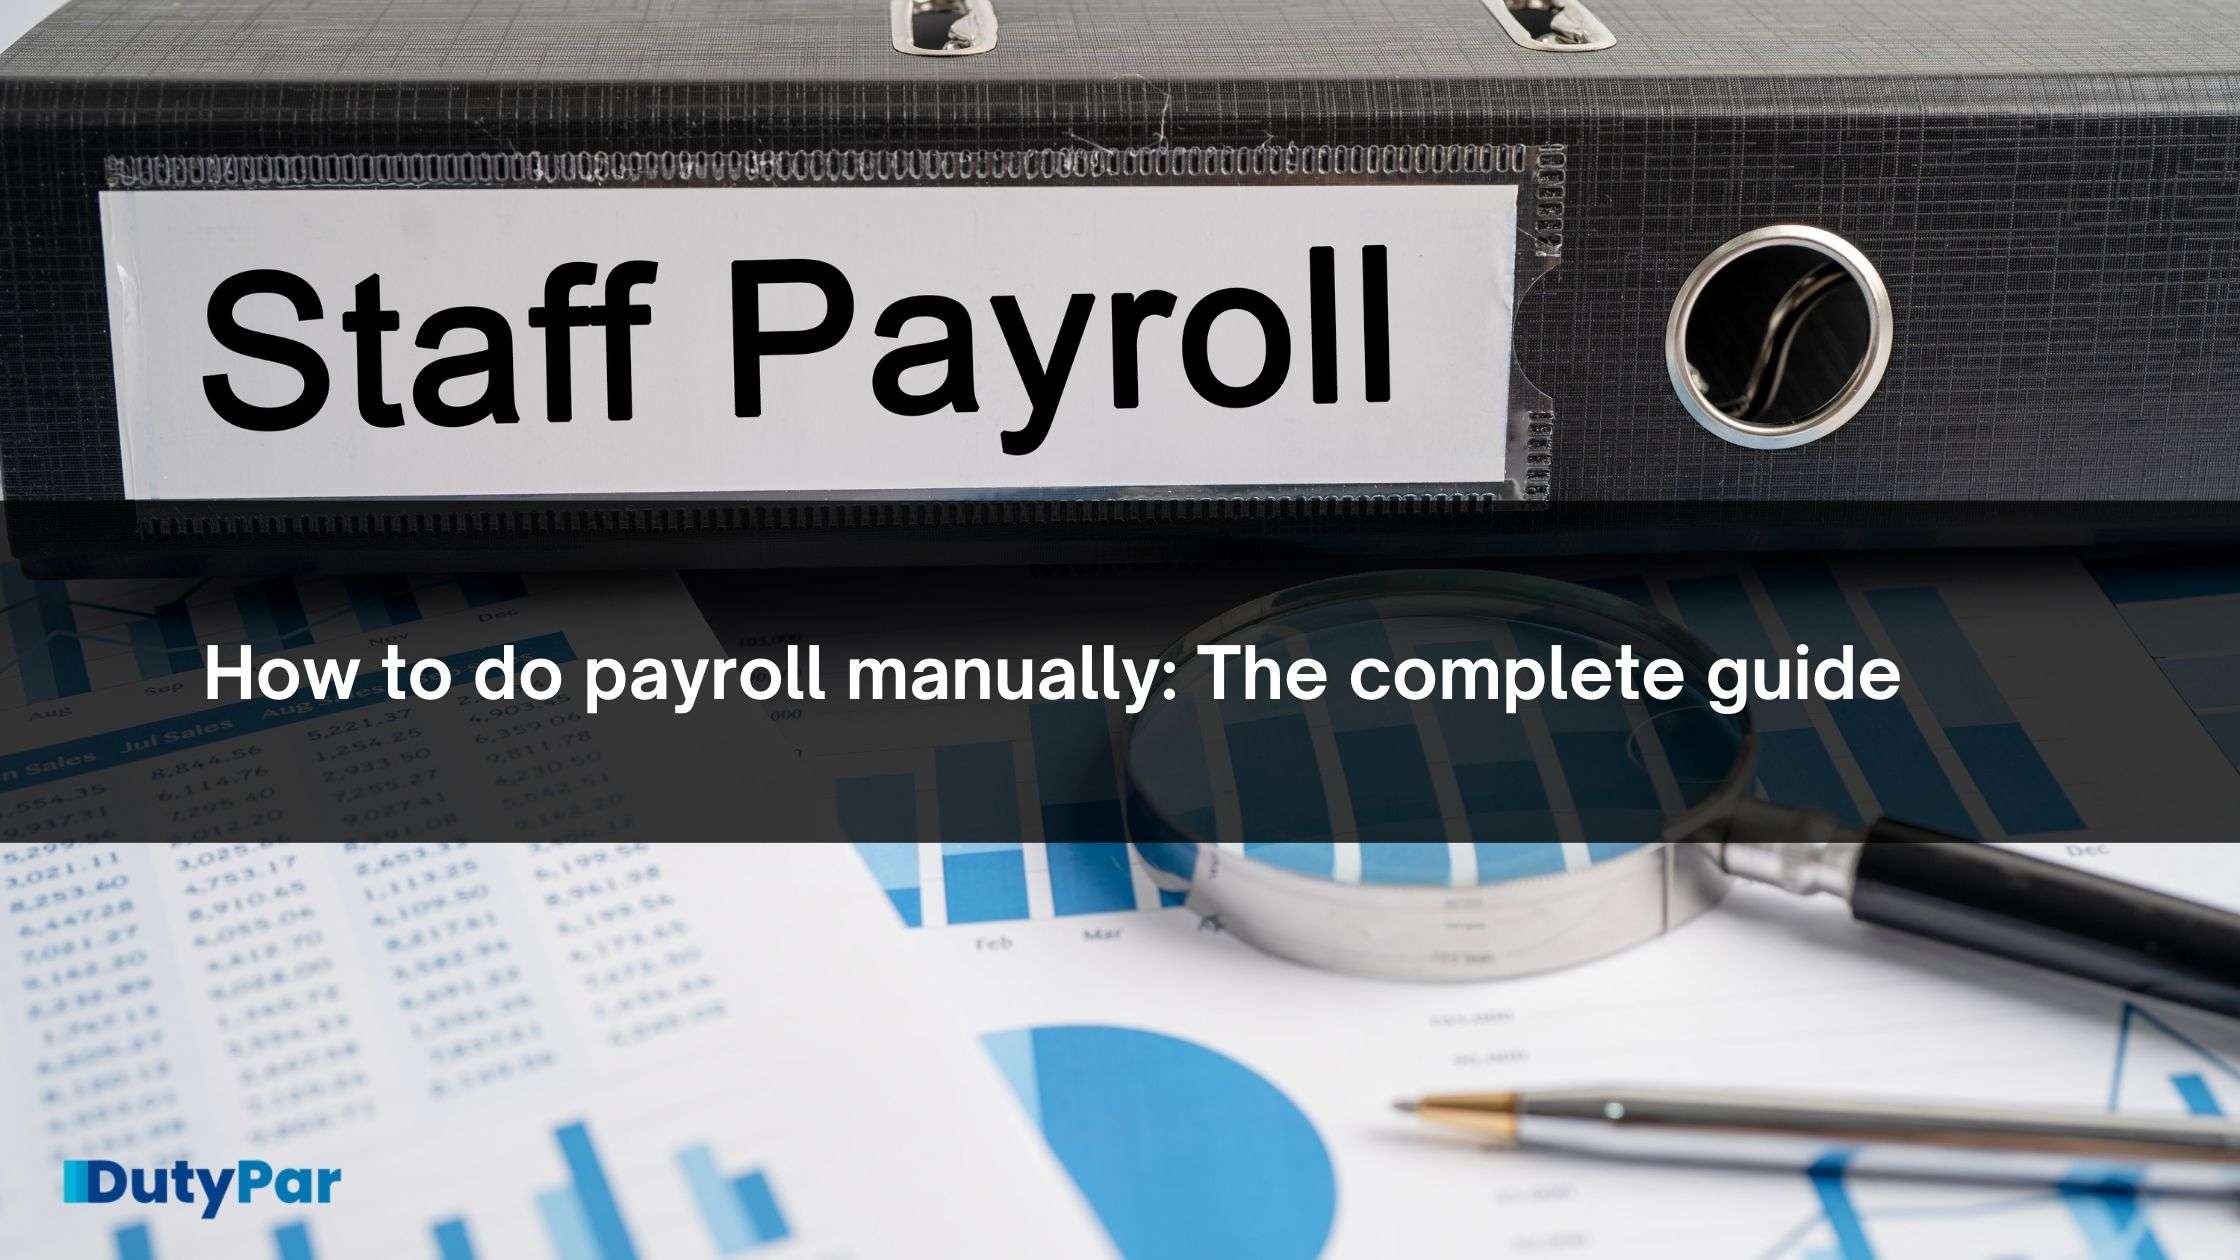 How to do payroll manually: The complete guide